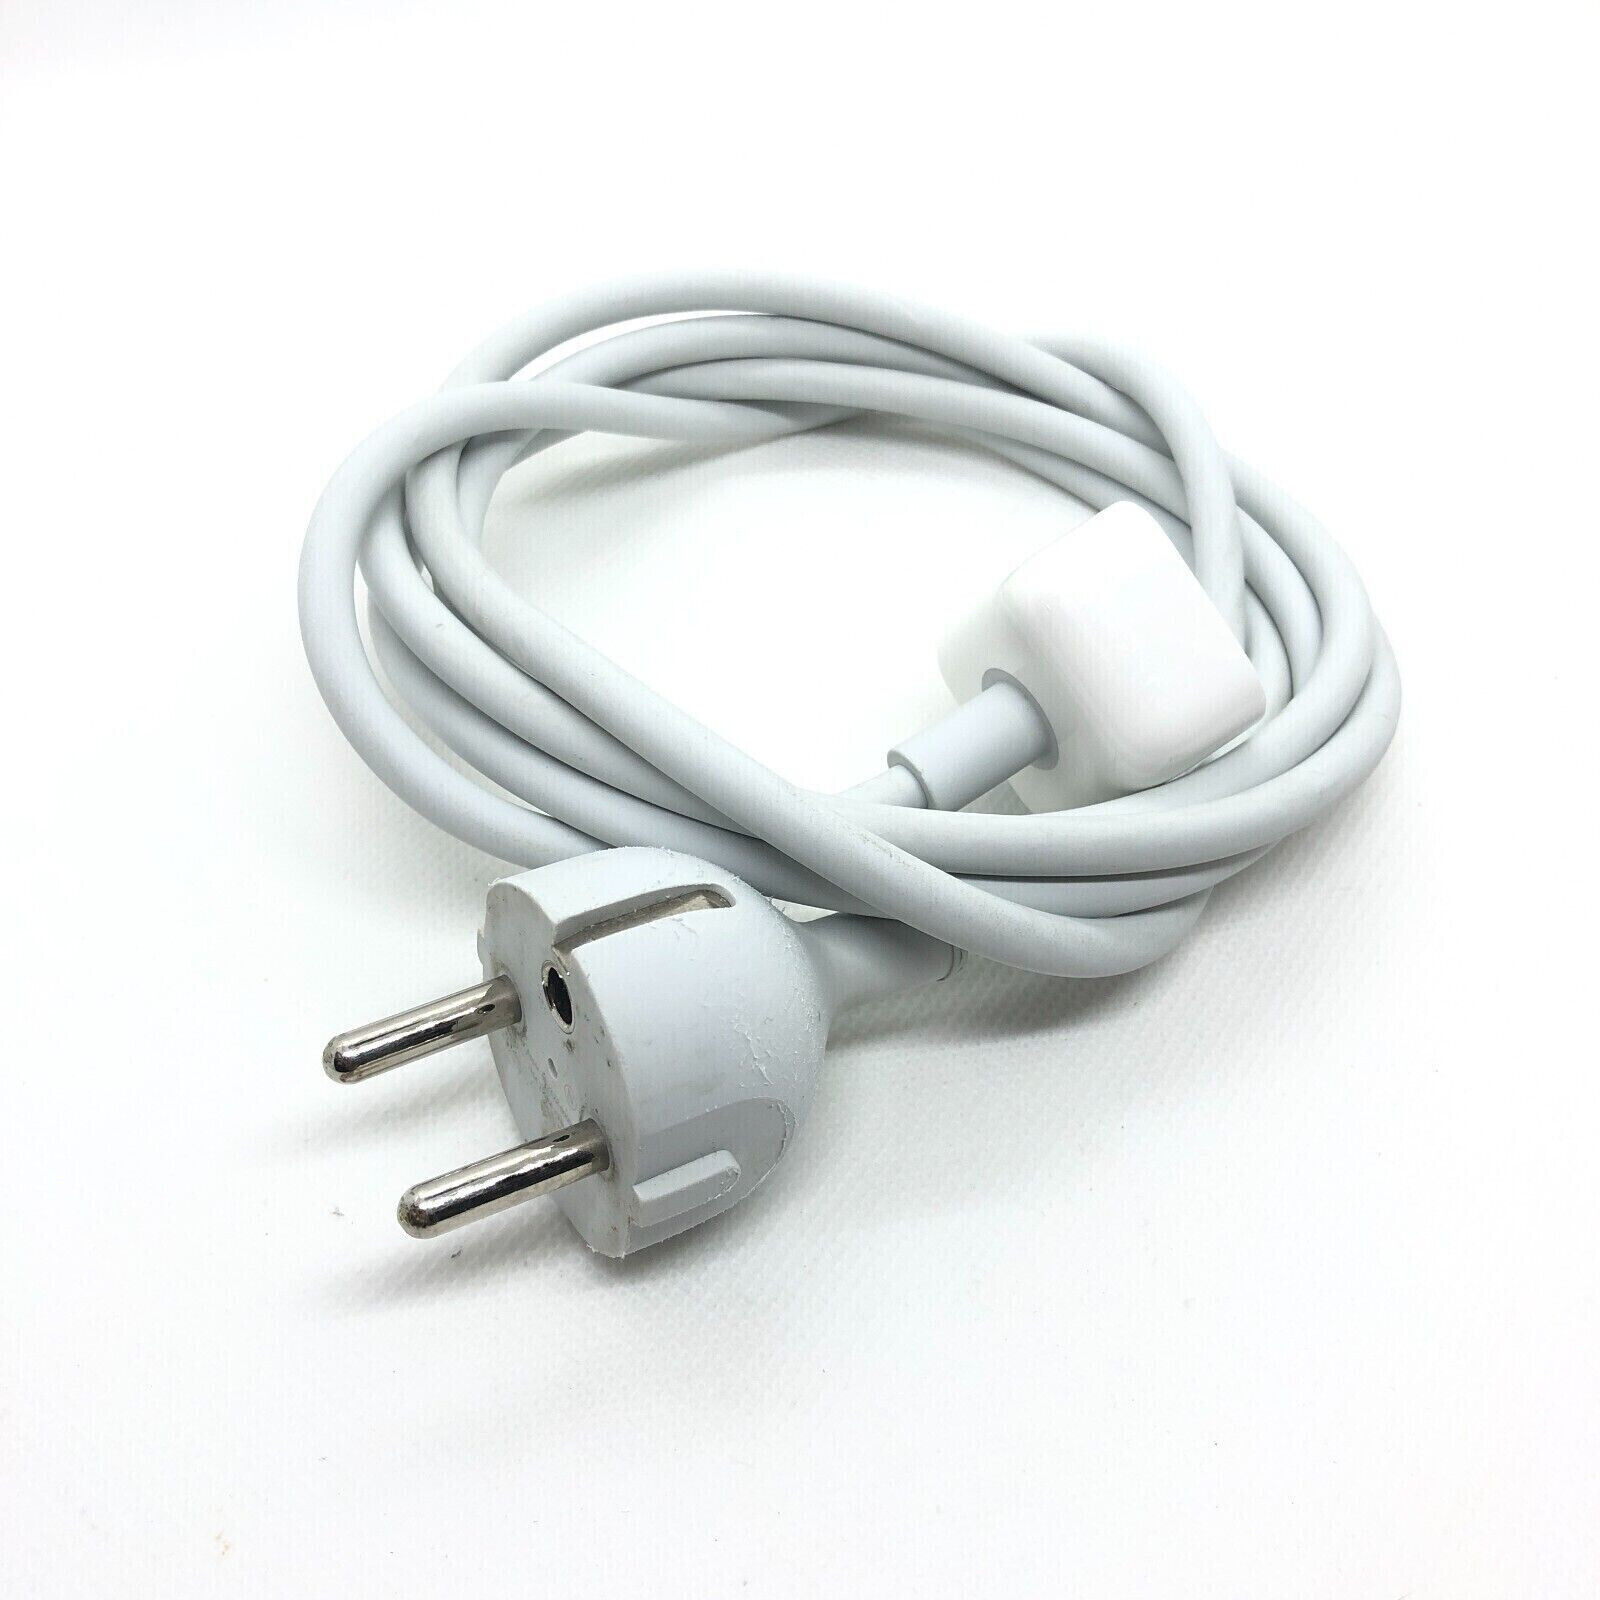 Apple A1689 POWER ADAPTER EXTENSION CABLE-INT MK122Z/A - $19.79